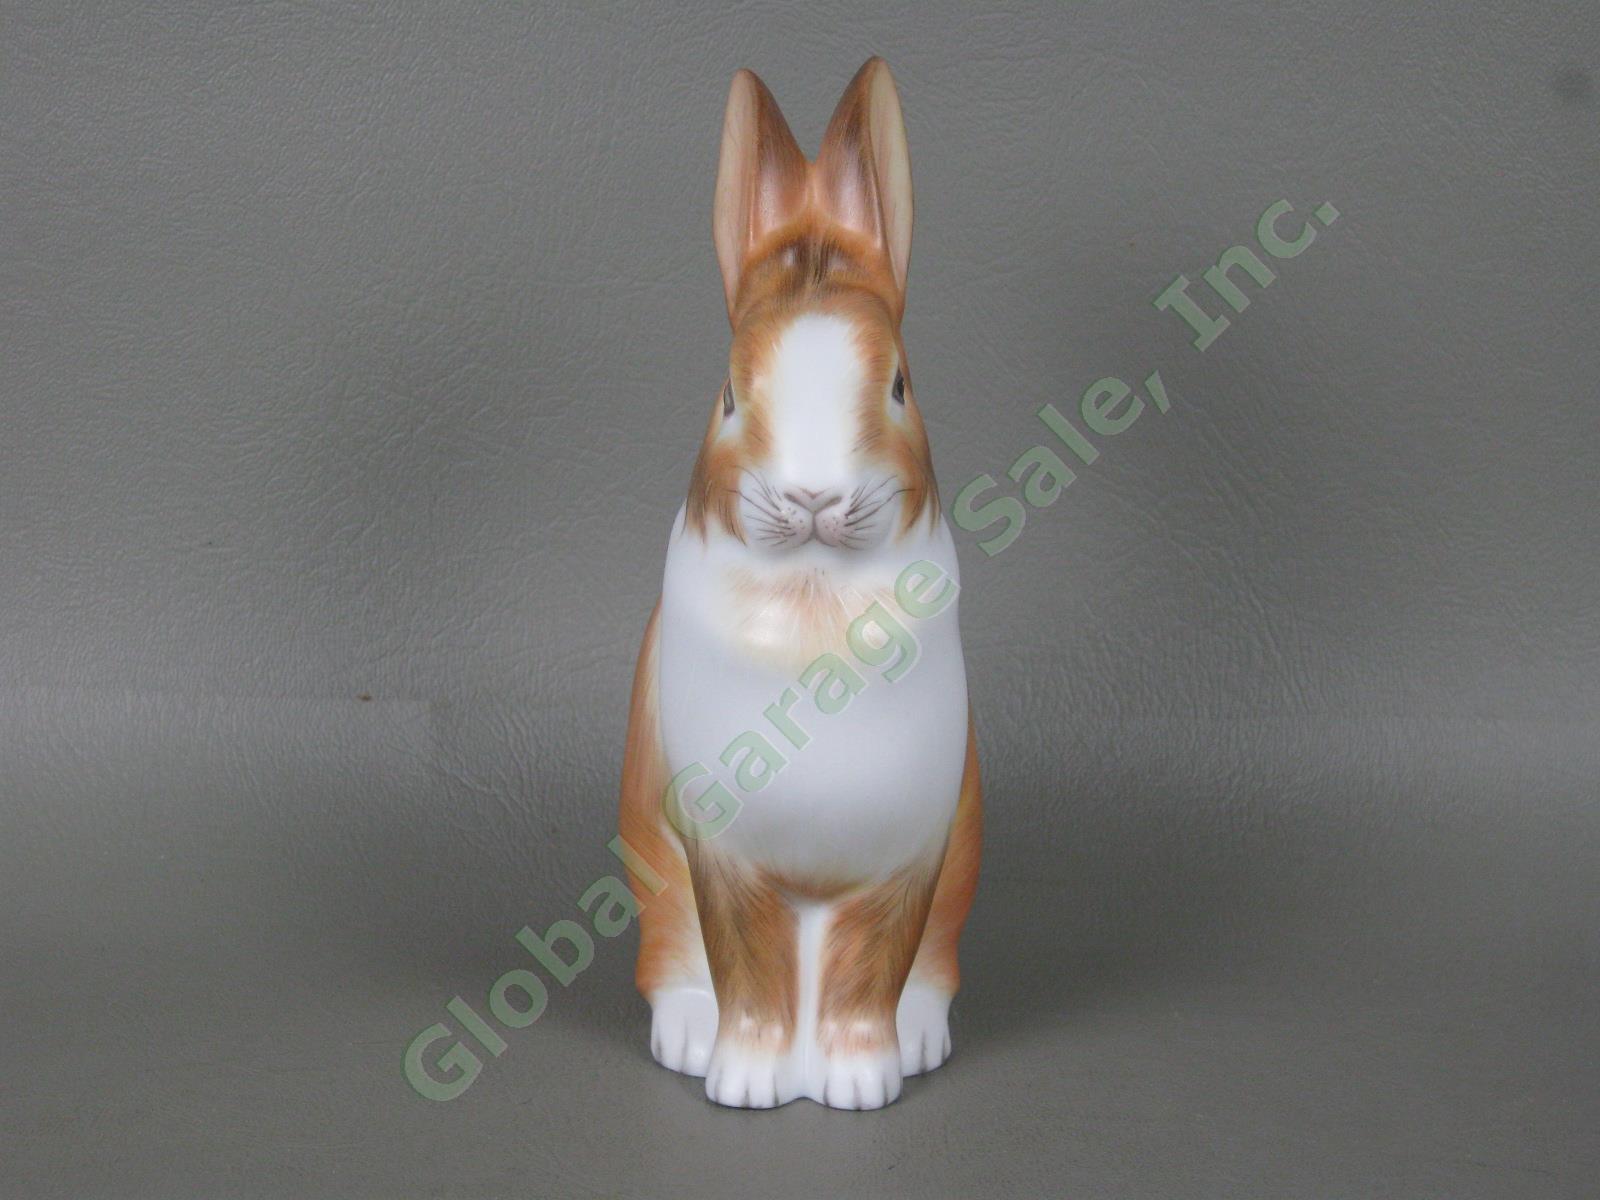 Herend Brown & White Handpainted 5.5" Porcelain Rabbit Figurine No Reserve Price 2